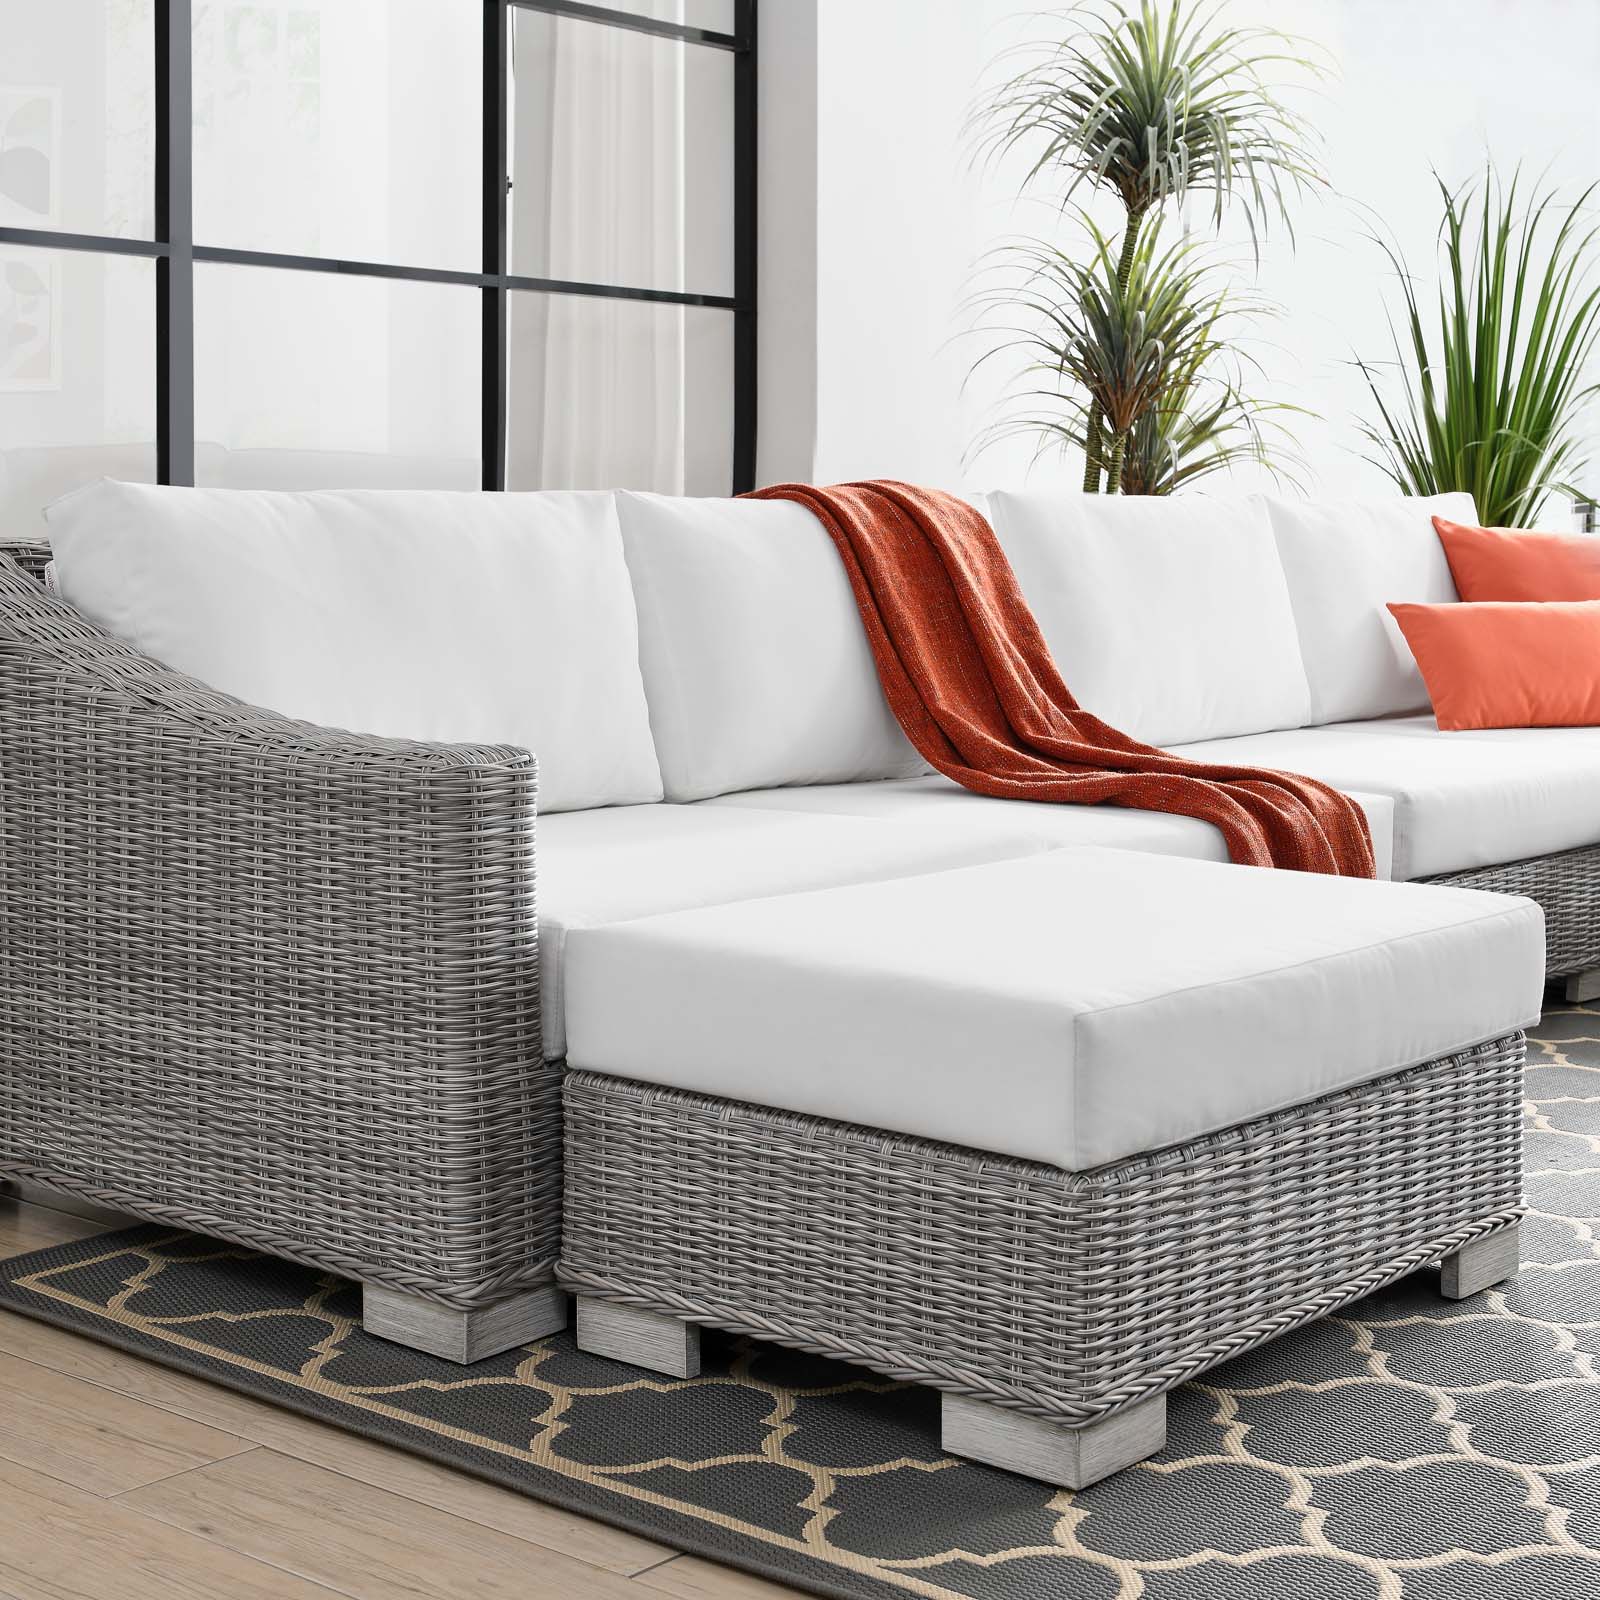 Lounge Sectional Sofa Chair Set, Rattan, Wicker, Light Grey Gray White, Modern Contemporary Urban Design, Outdoor Patio Balcony Cafe Bistro Garden Furniture Hotel Hospitality - image 5 of 10